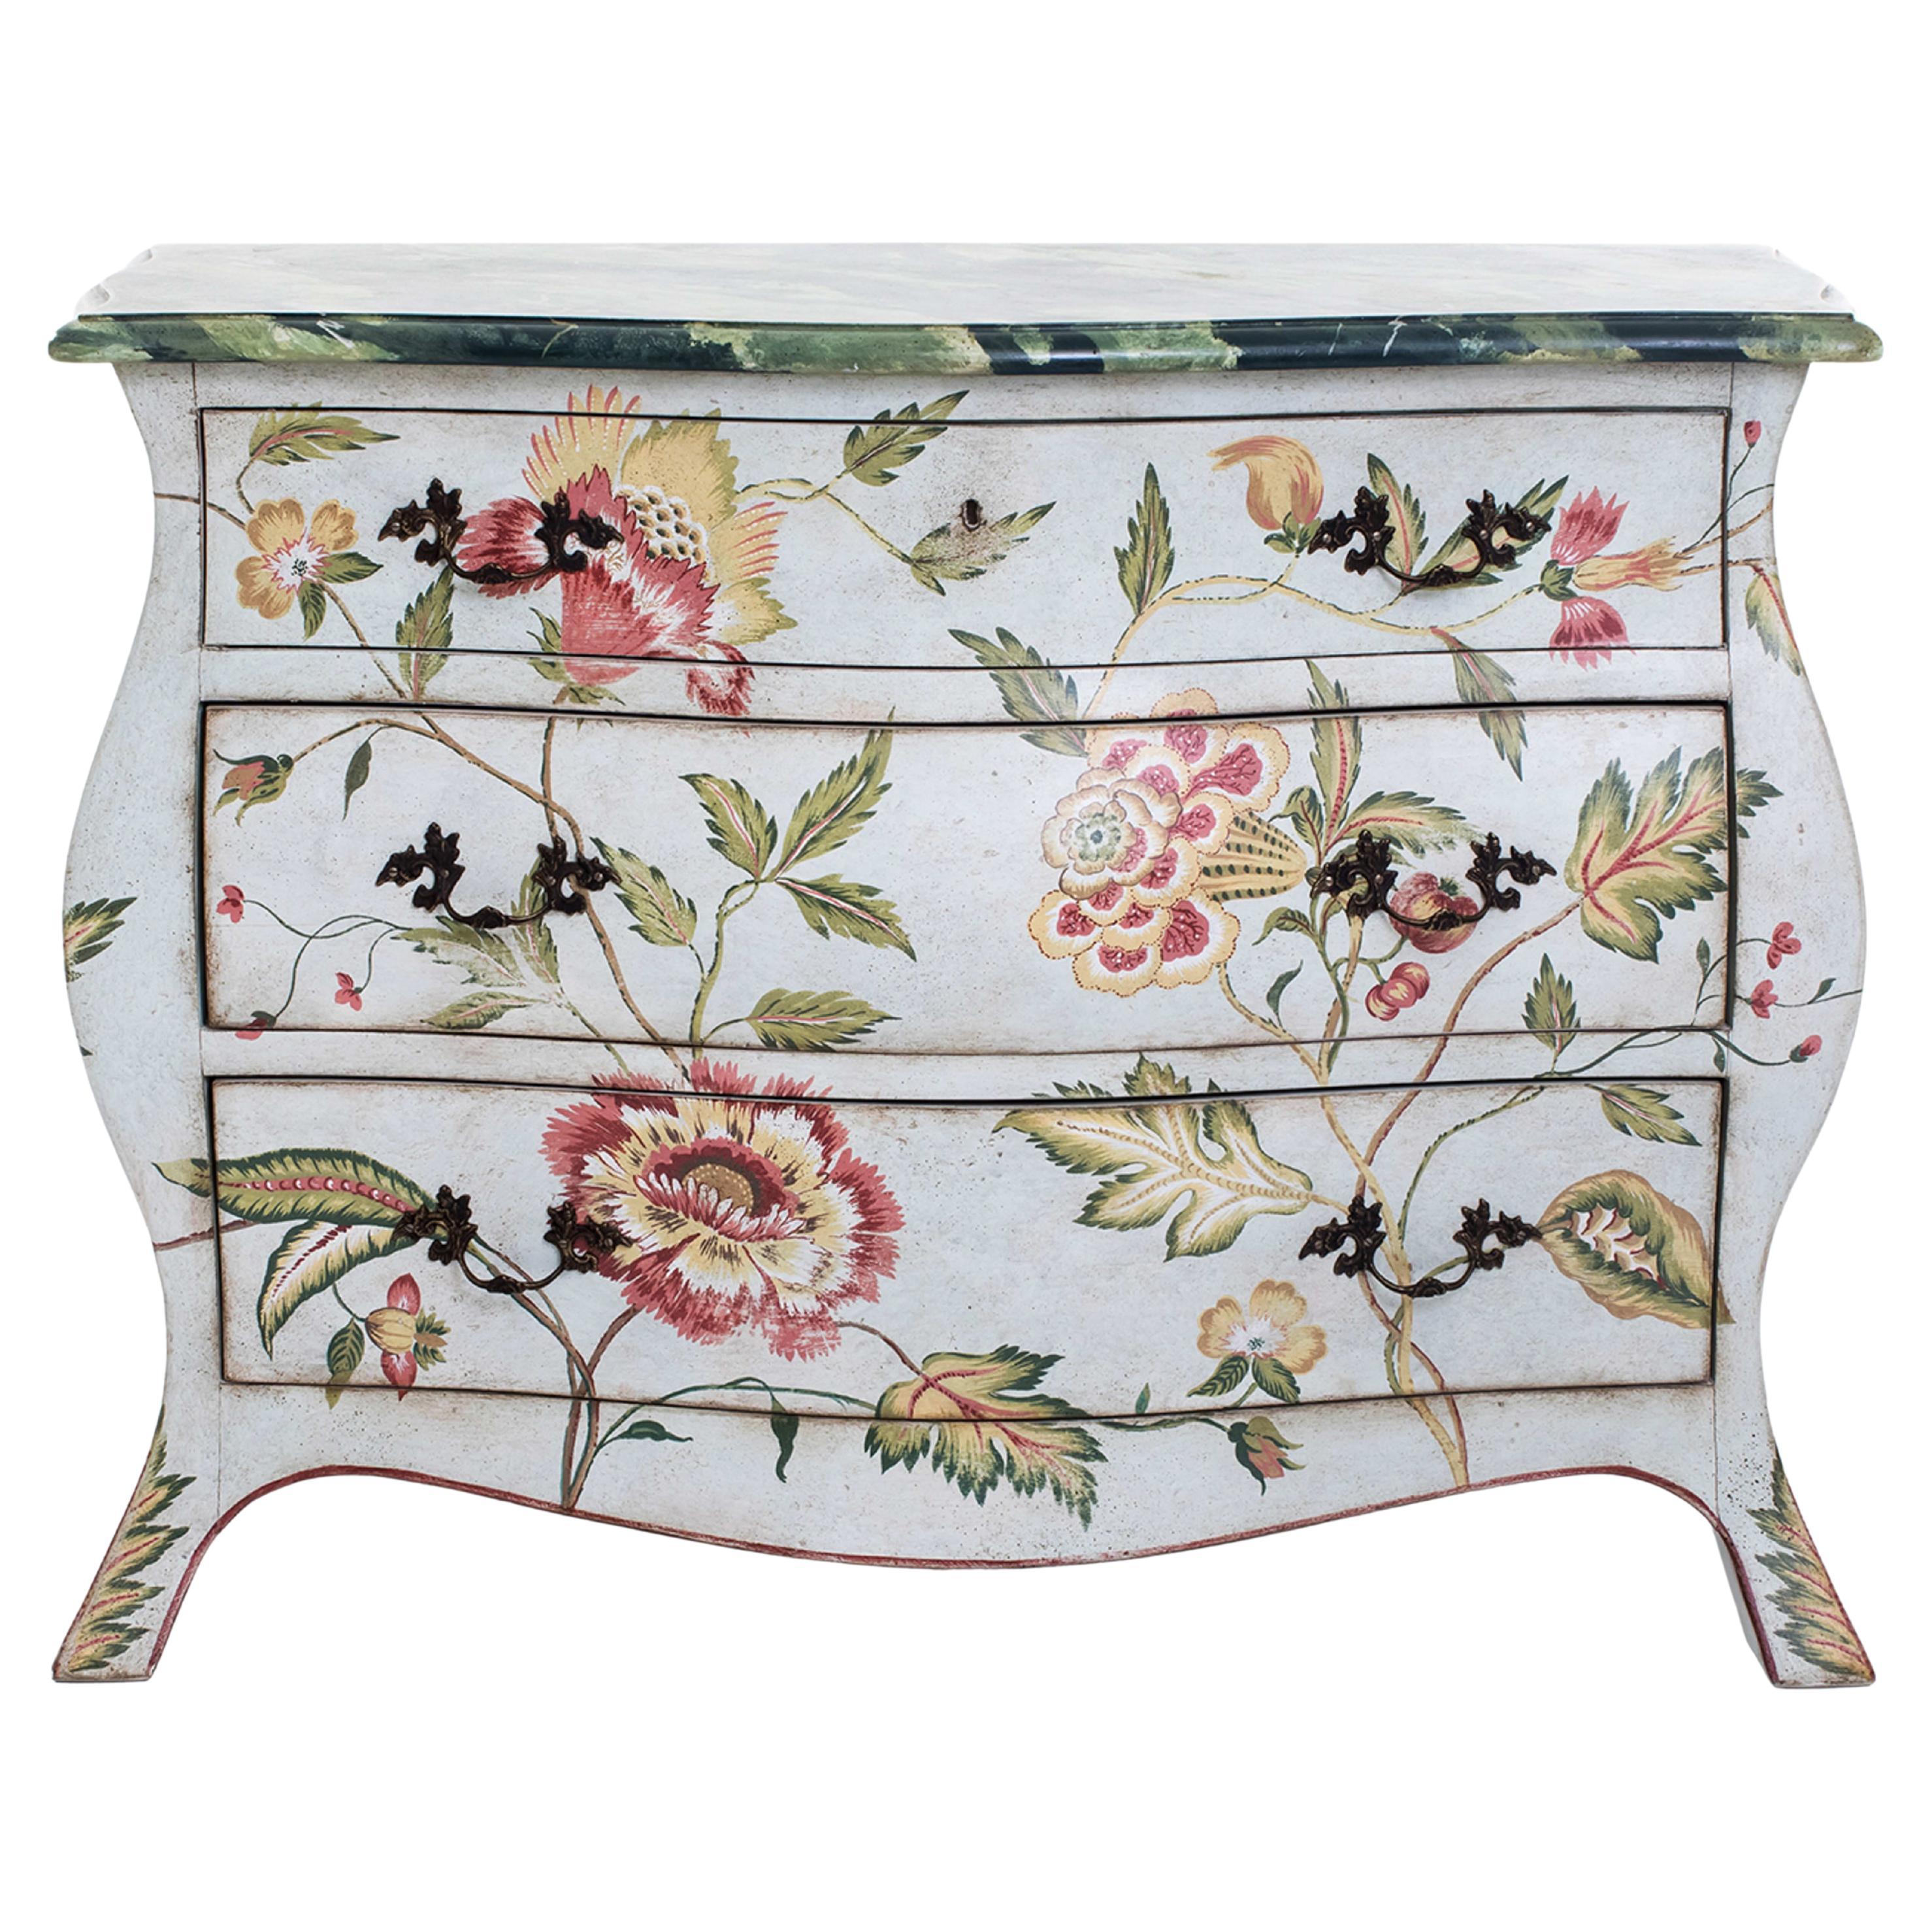 Asolo Jacobean Decor Chest of Drawers For Sale